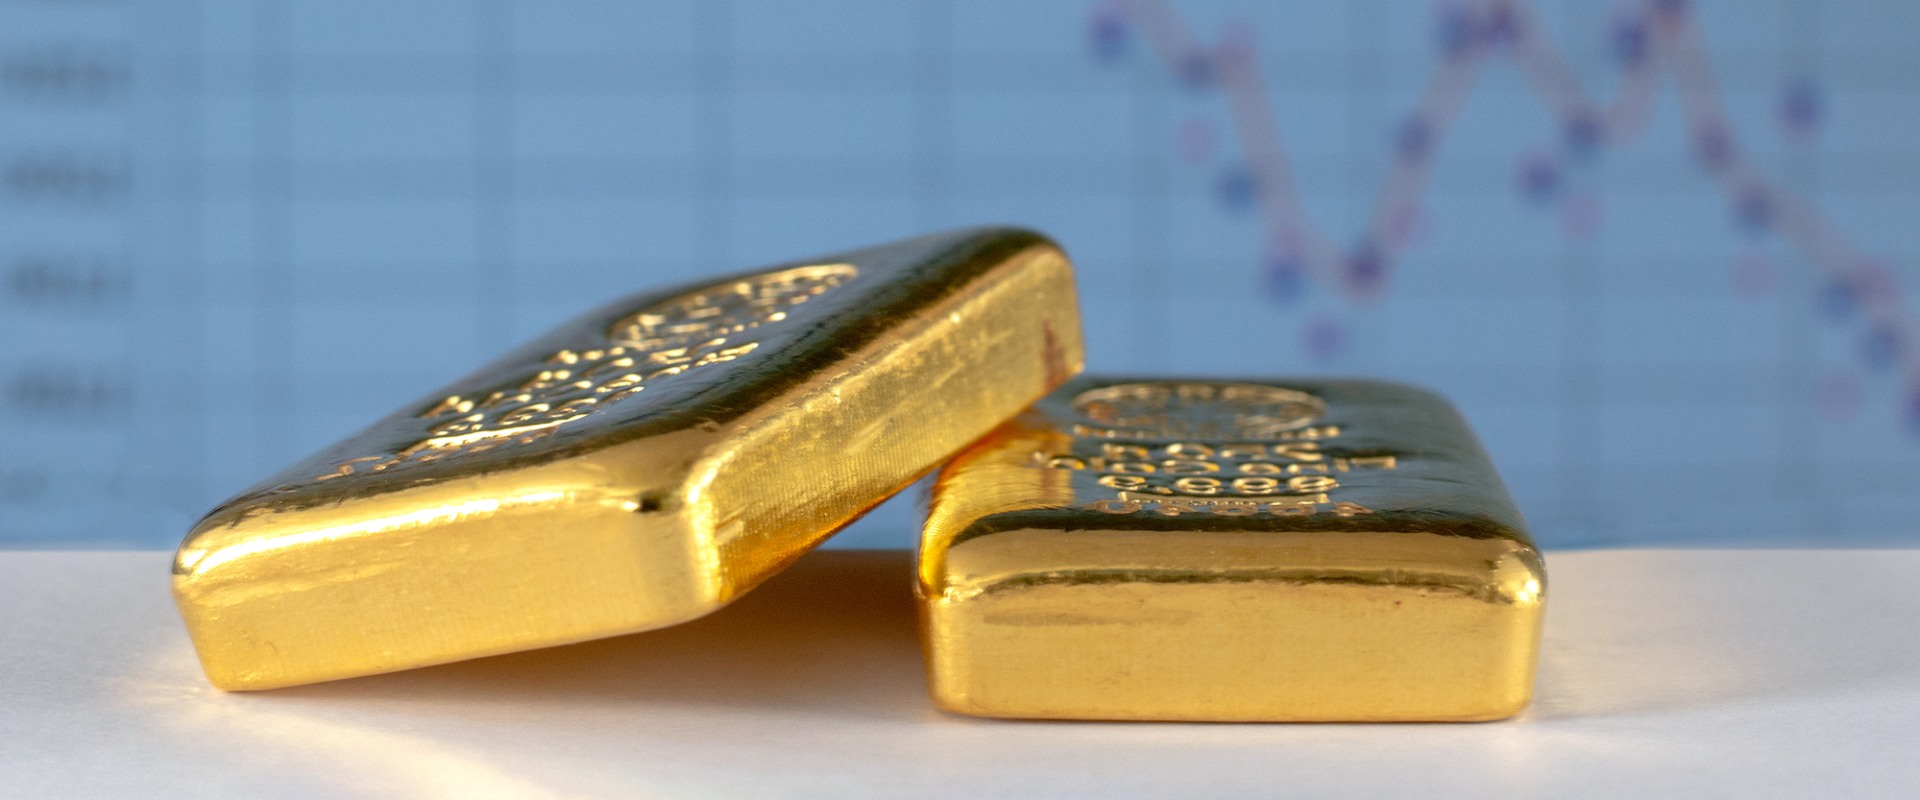 Is it better to buy stocks or gold?